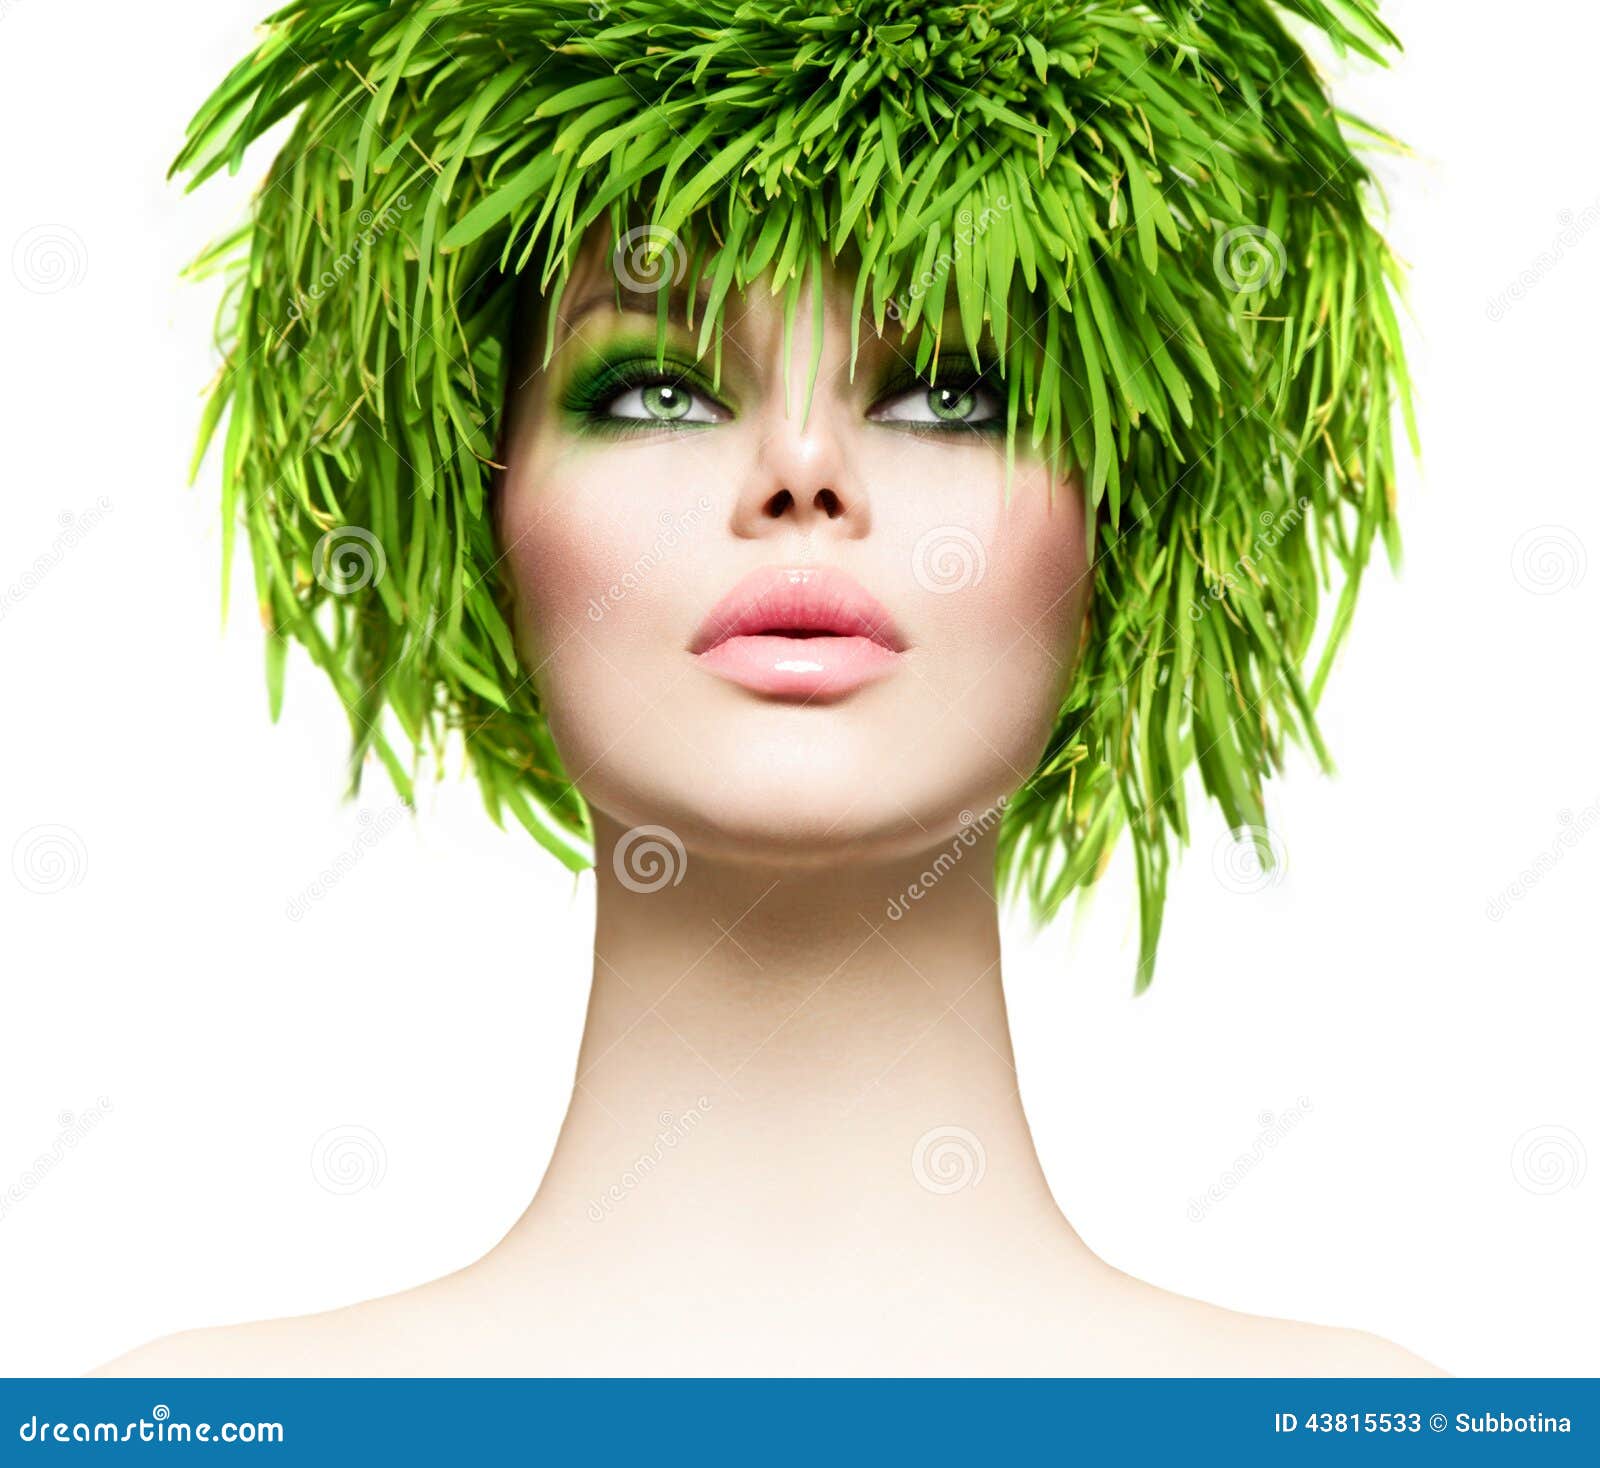 Beauty Woman with Fresh Green Grass Hair Stock Image of meadow, healthy: 43815533